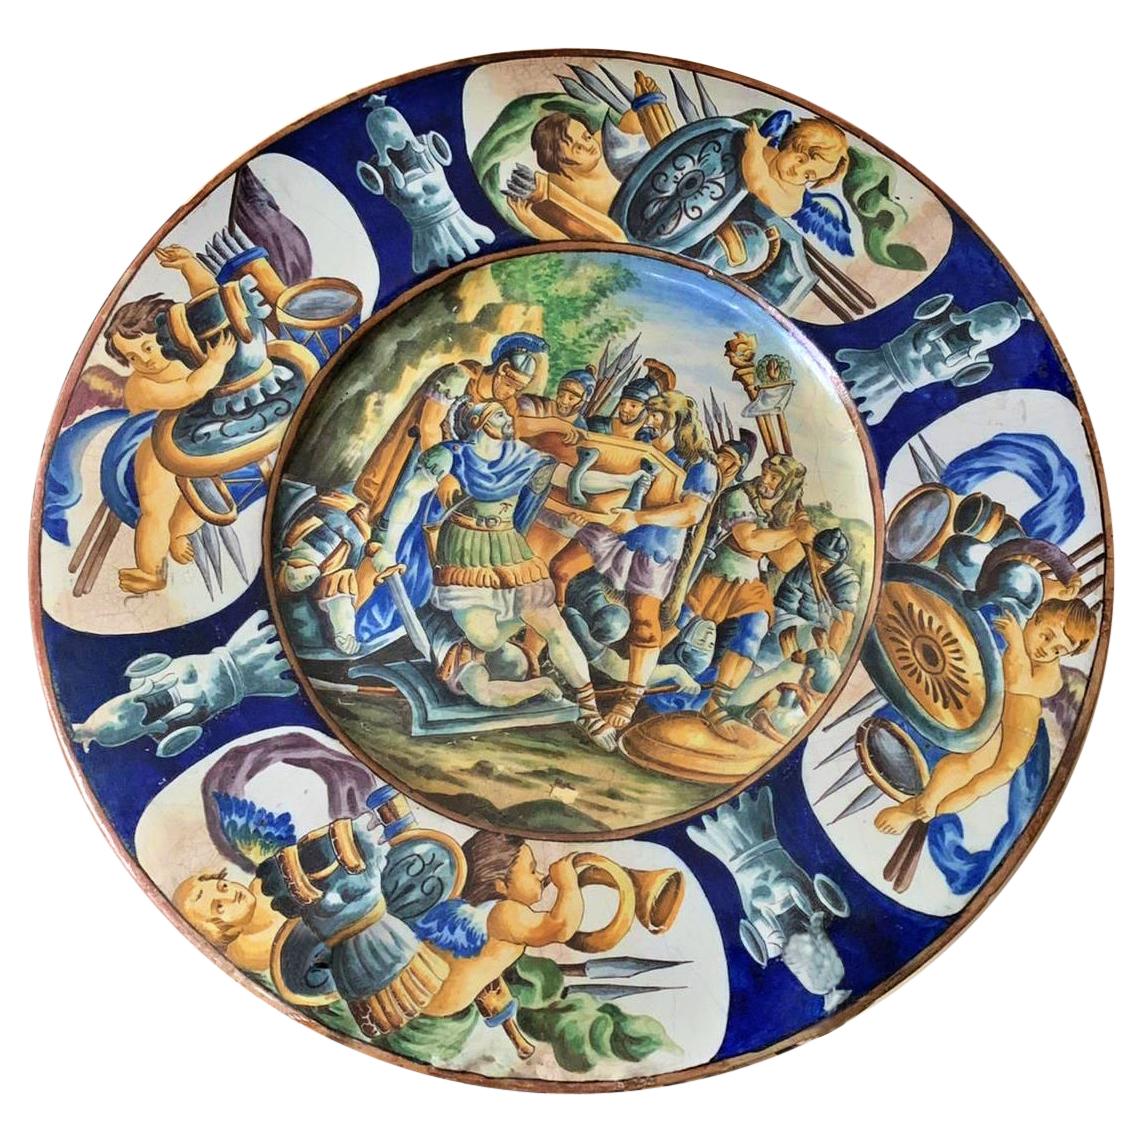 Italian Porcelain Plate from 19th Century " War "